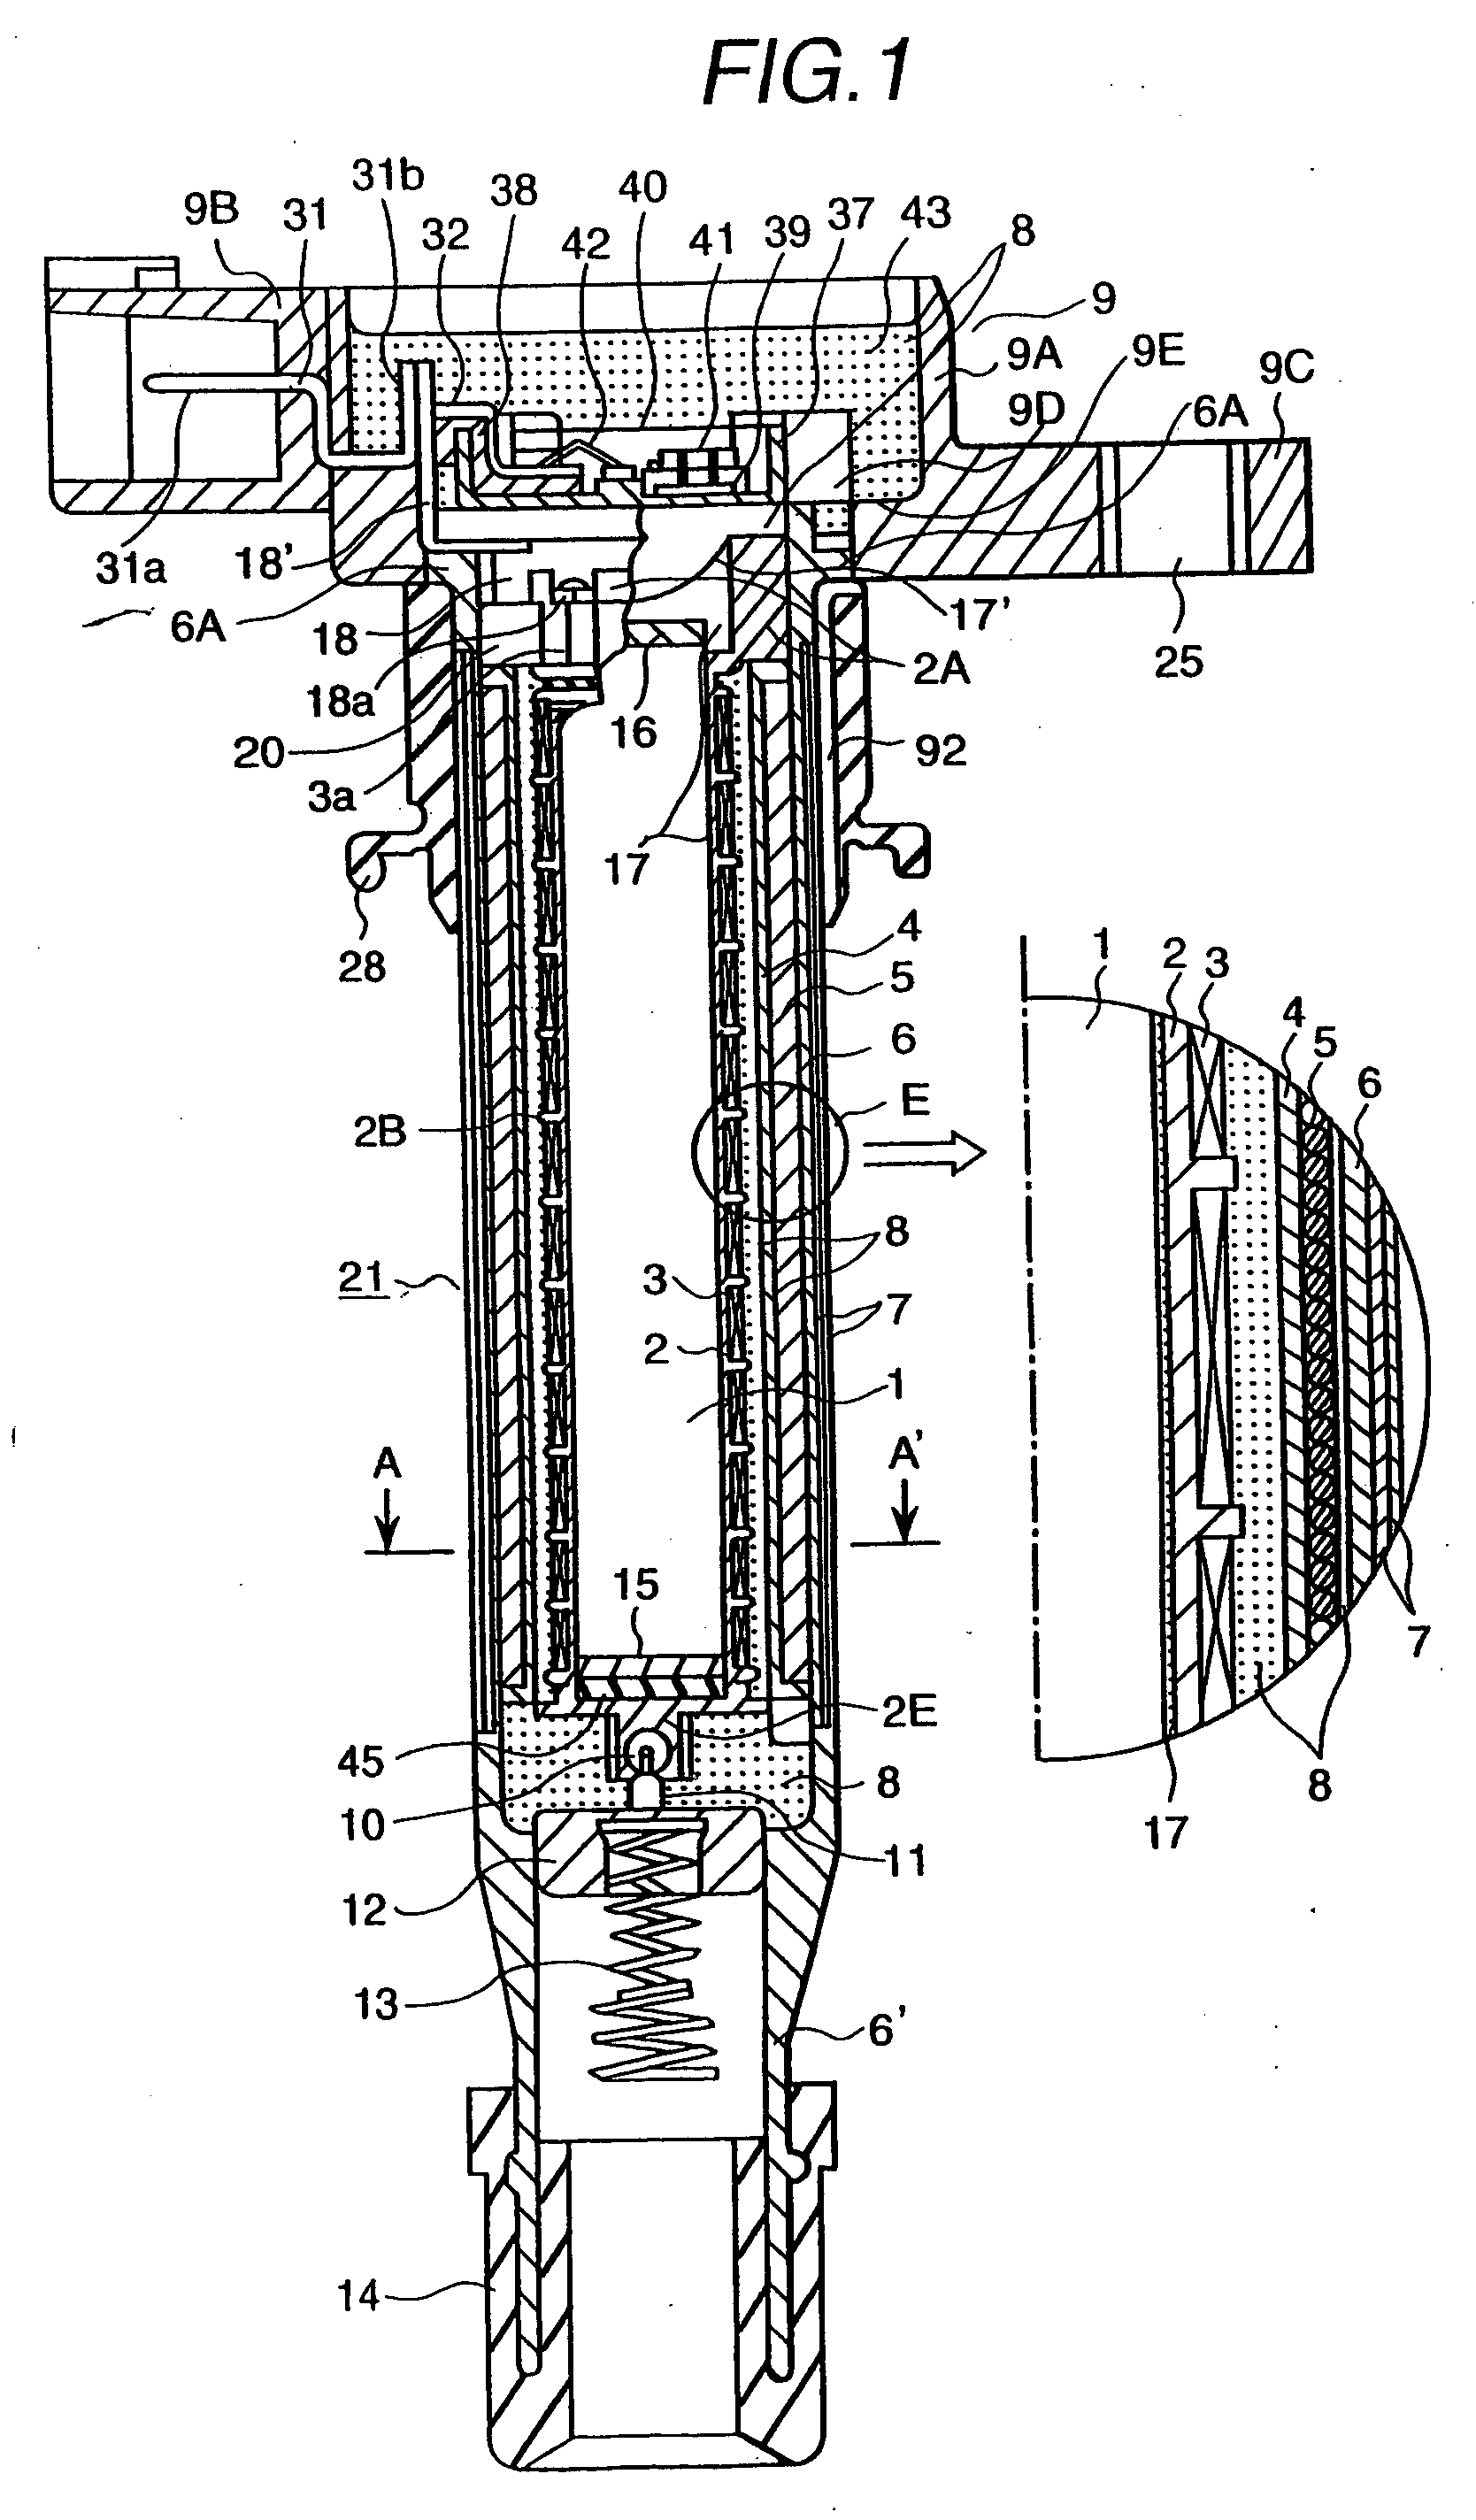 Ignition coil for use in engine and engine having plastic cylinder head cover